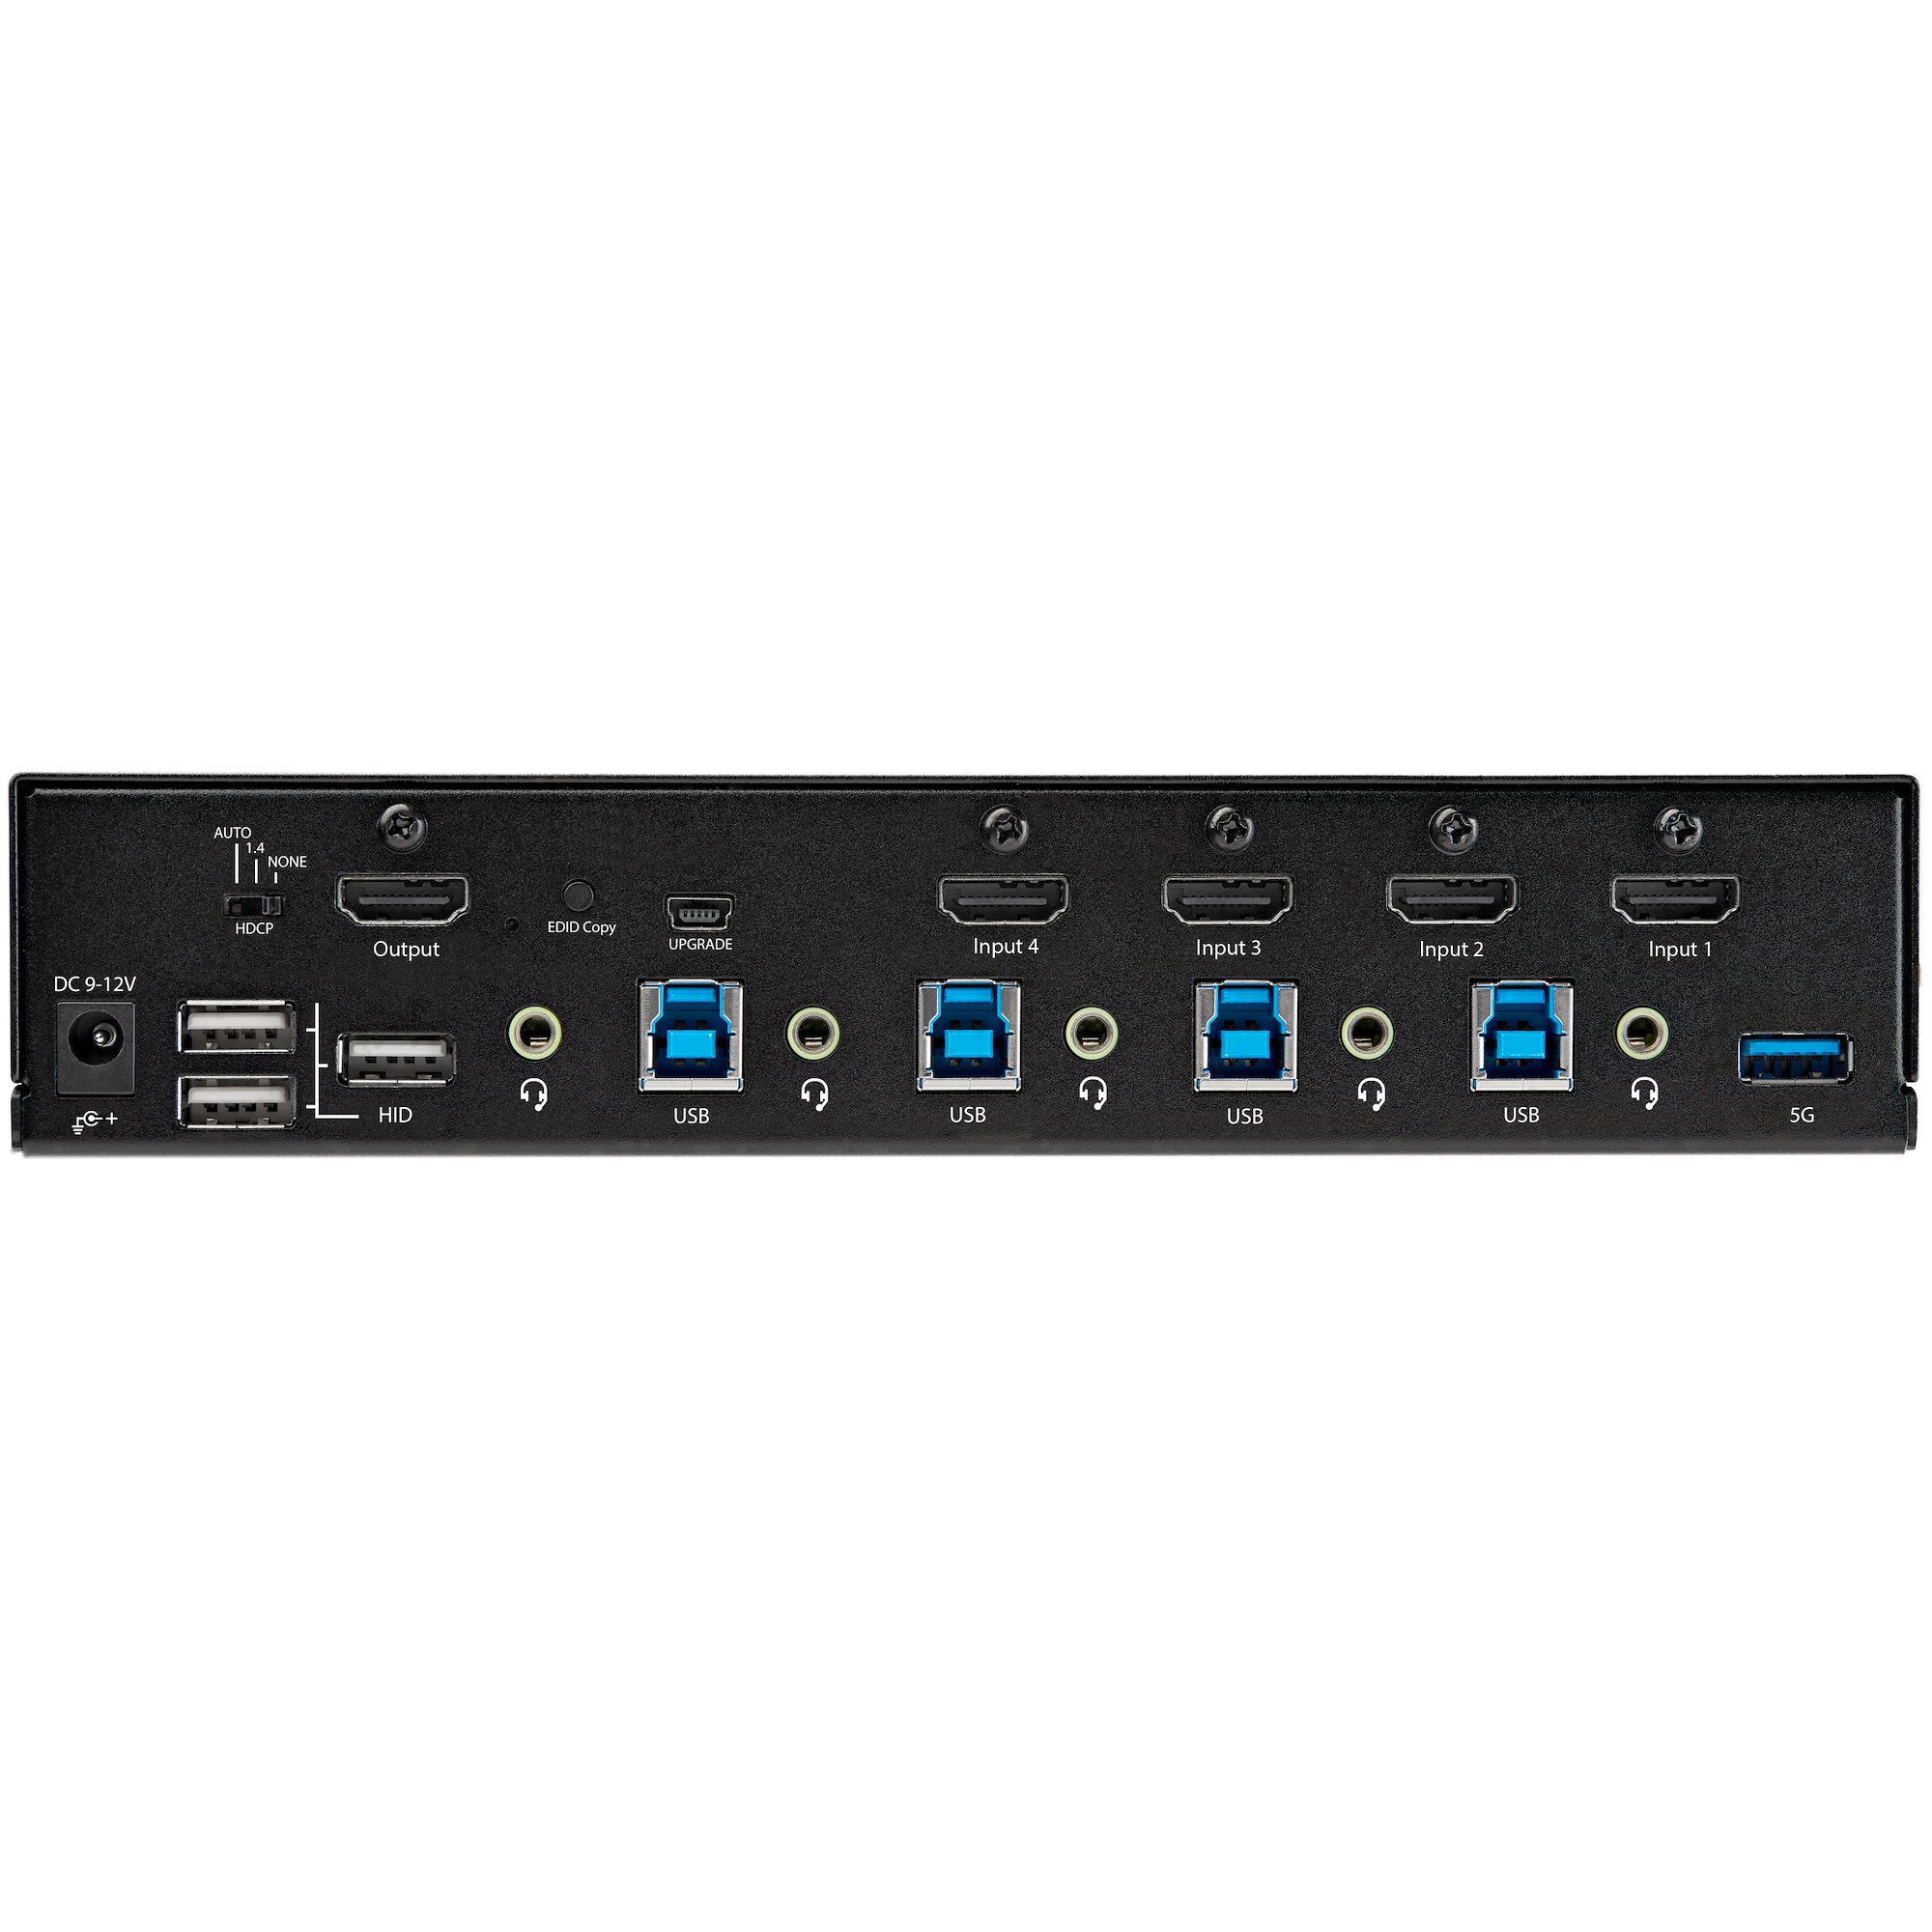 KVM HDMI Switch 4 Ports, USB 3.0 KVM Selector Box with EDID Emulator  Support 4K@60Hz Resolution for 4 Computers Share Mouse Keyboard and Monitor